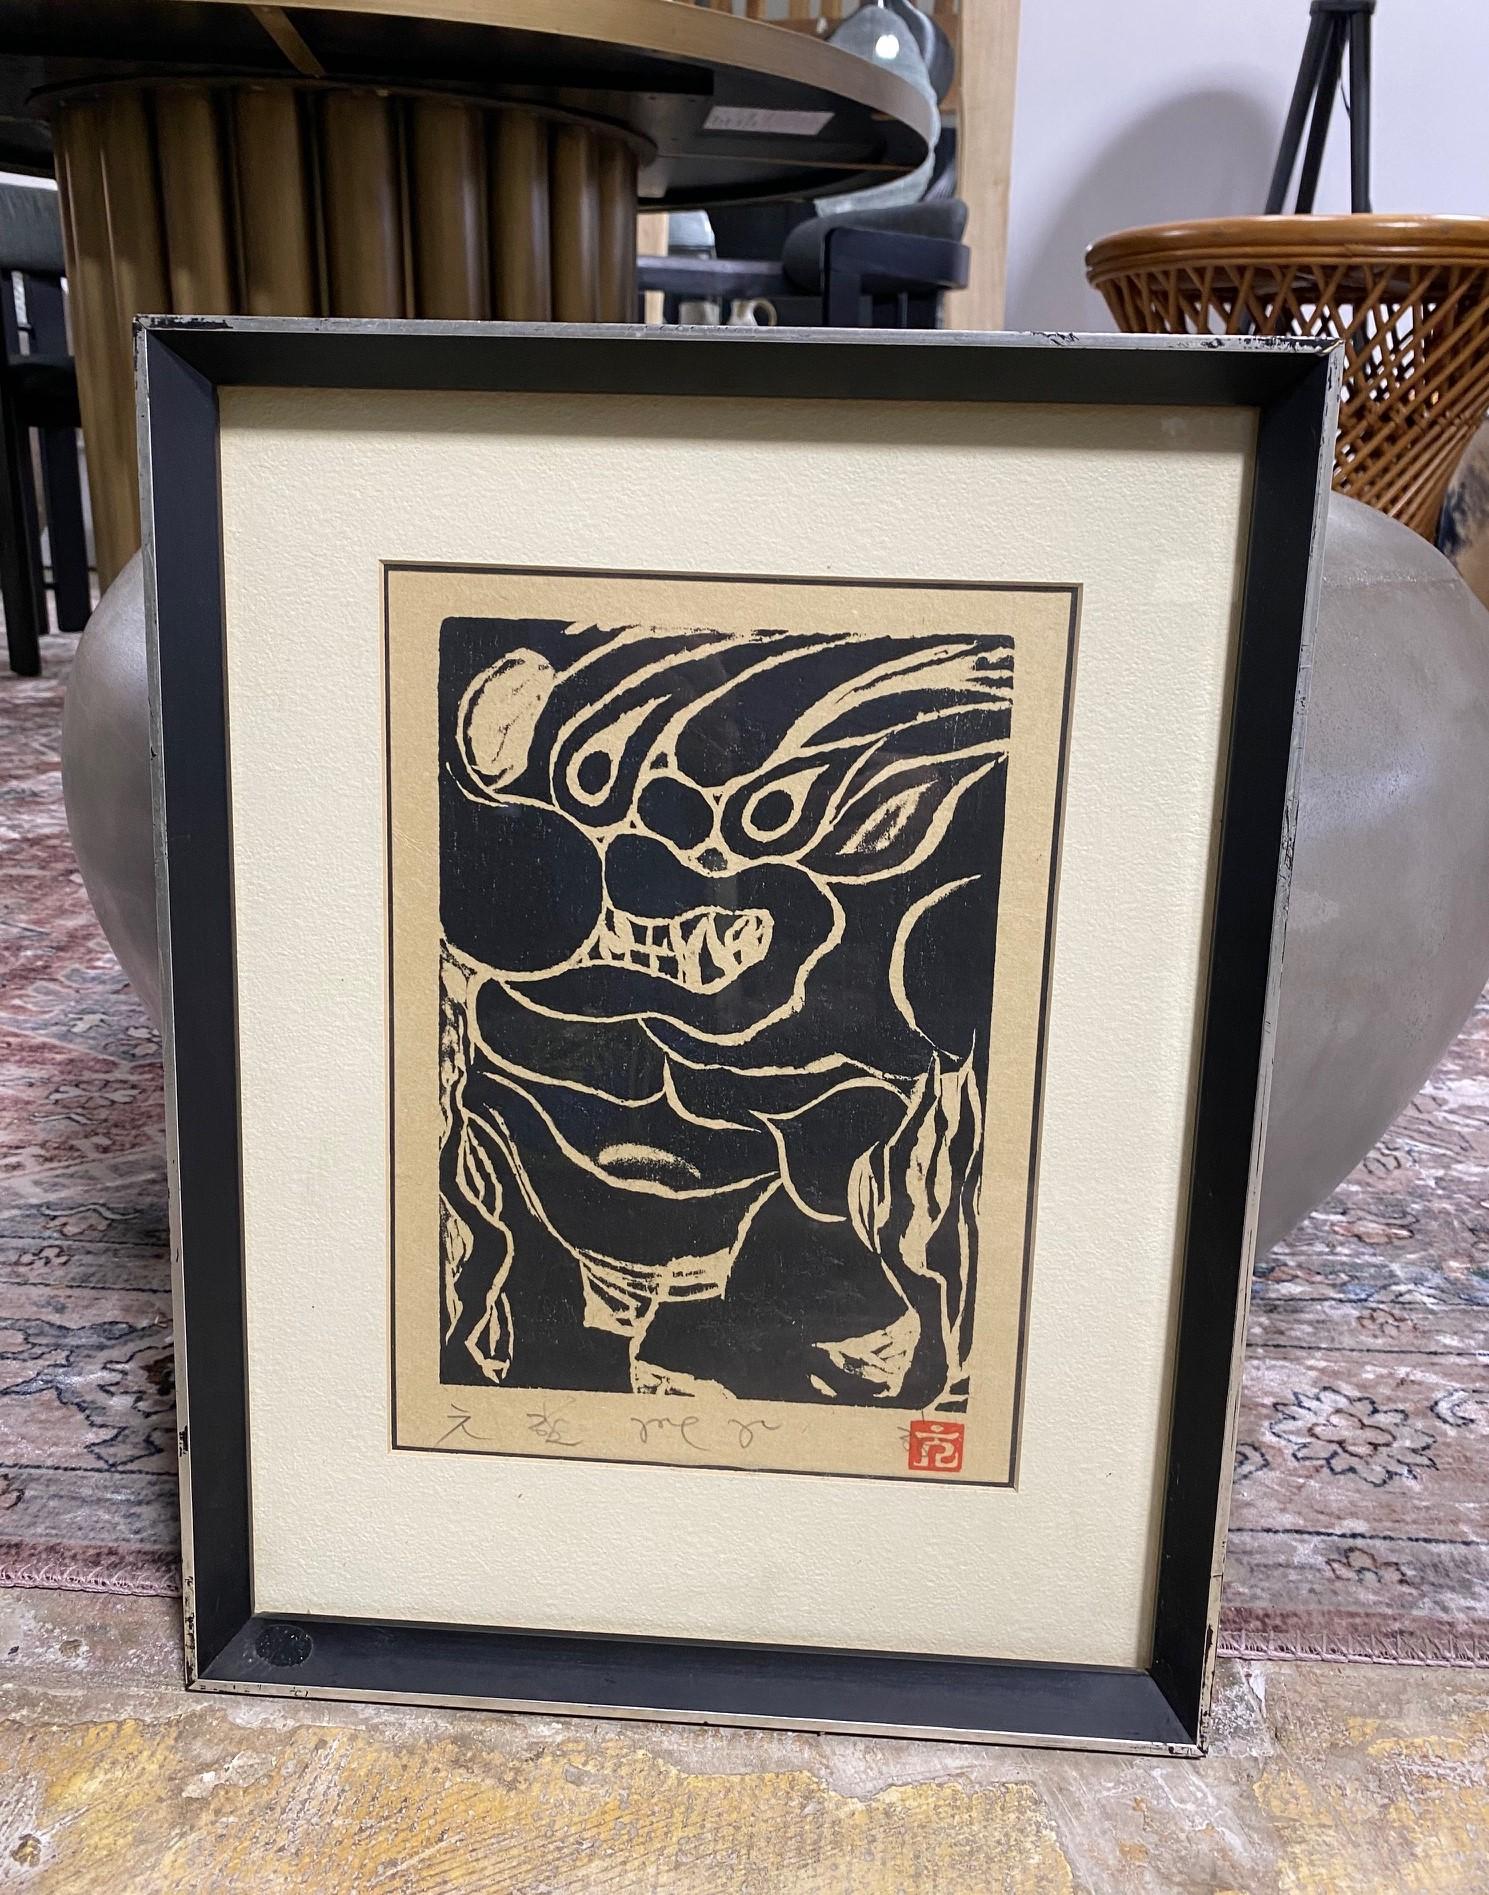 A wonderful and quite unusual limited edition black & white Japanese woodblock print of a mystical/ mythological demon or creature - quite reminiscent of the work of Iwao Akiyama and master printmaker Shiko Munakata. 

The print is hand-signed in